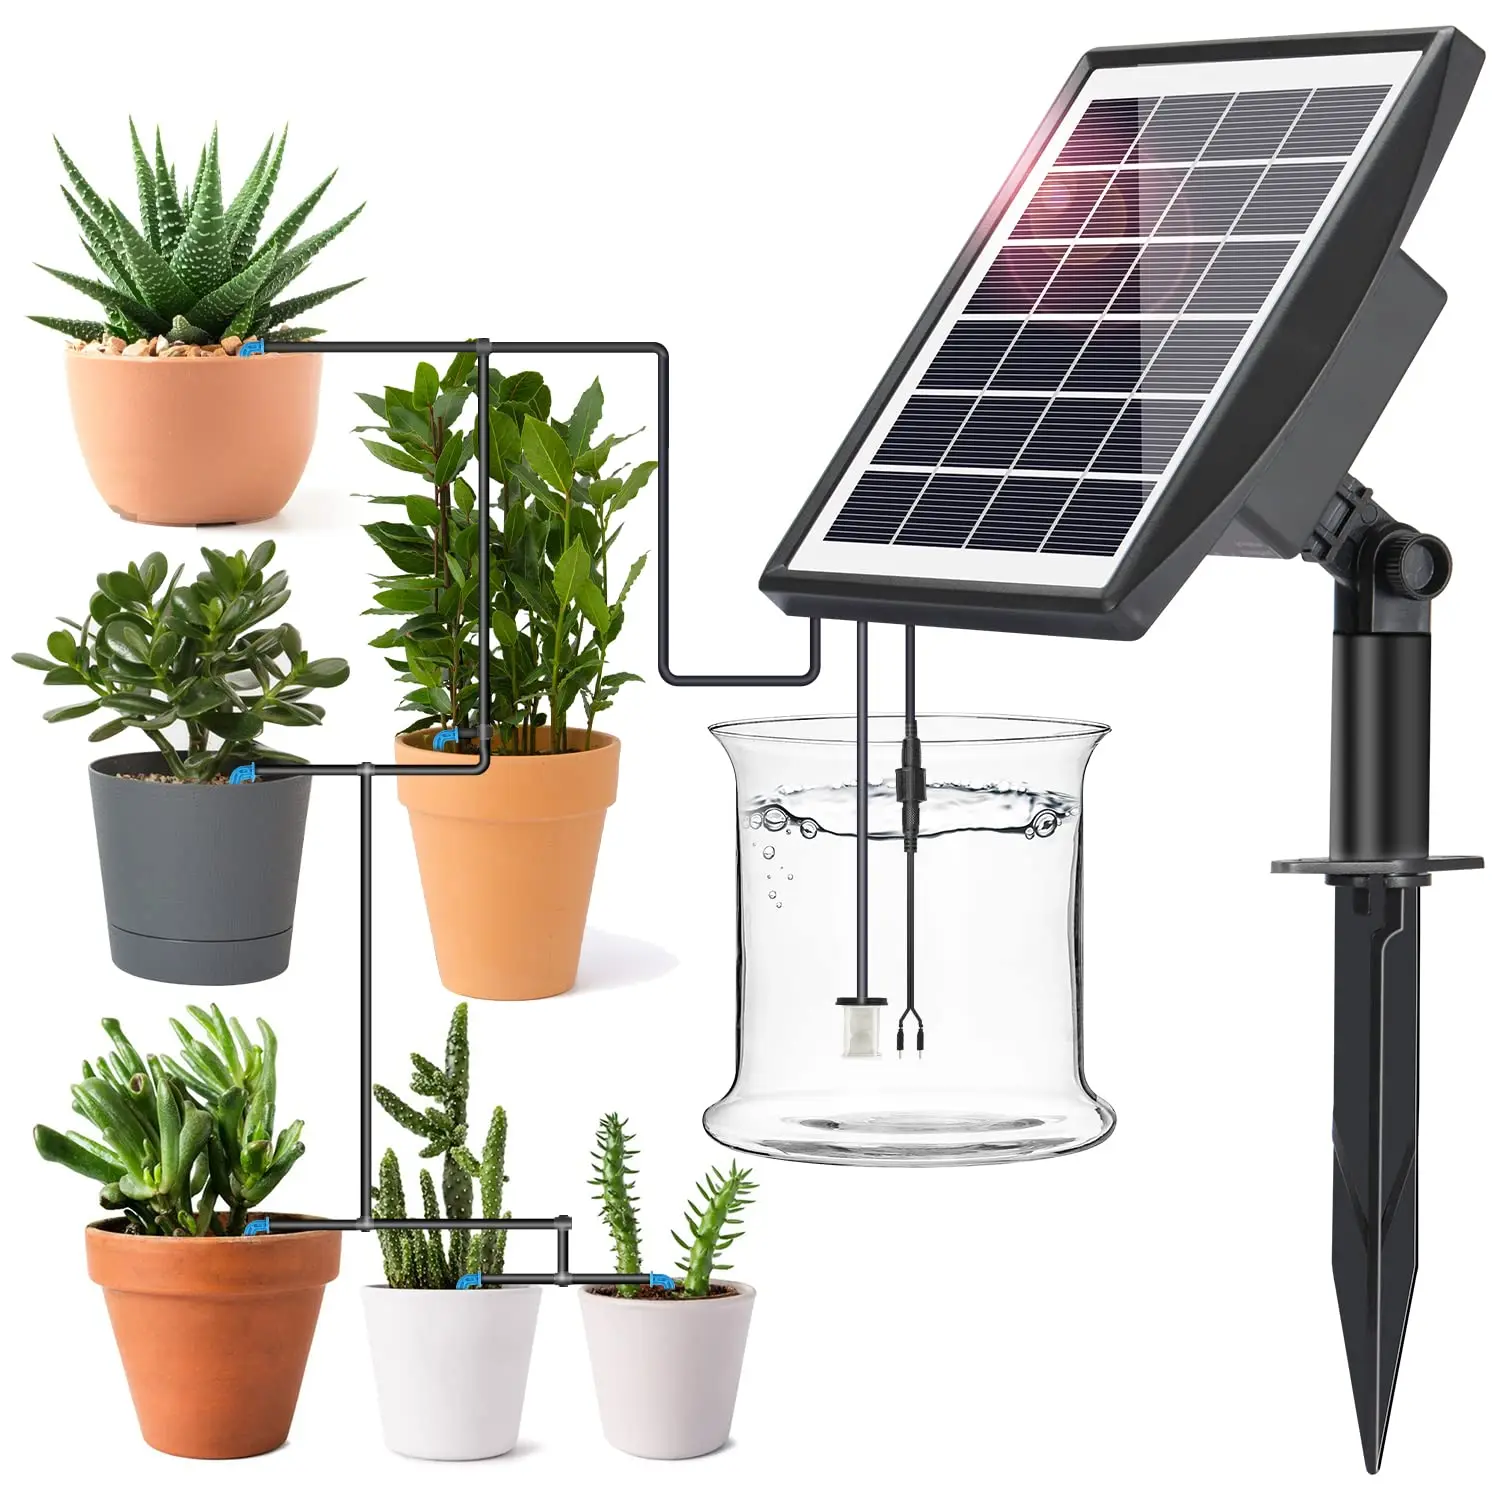 

Solar Irrigation Automatic Plants Watering System Solar Powered Drip Irrigation Kit Self Watering devices with Timer